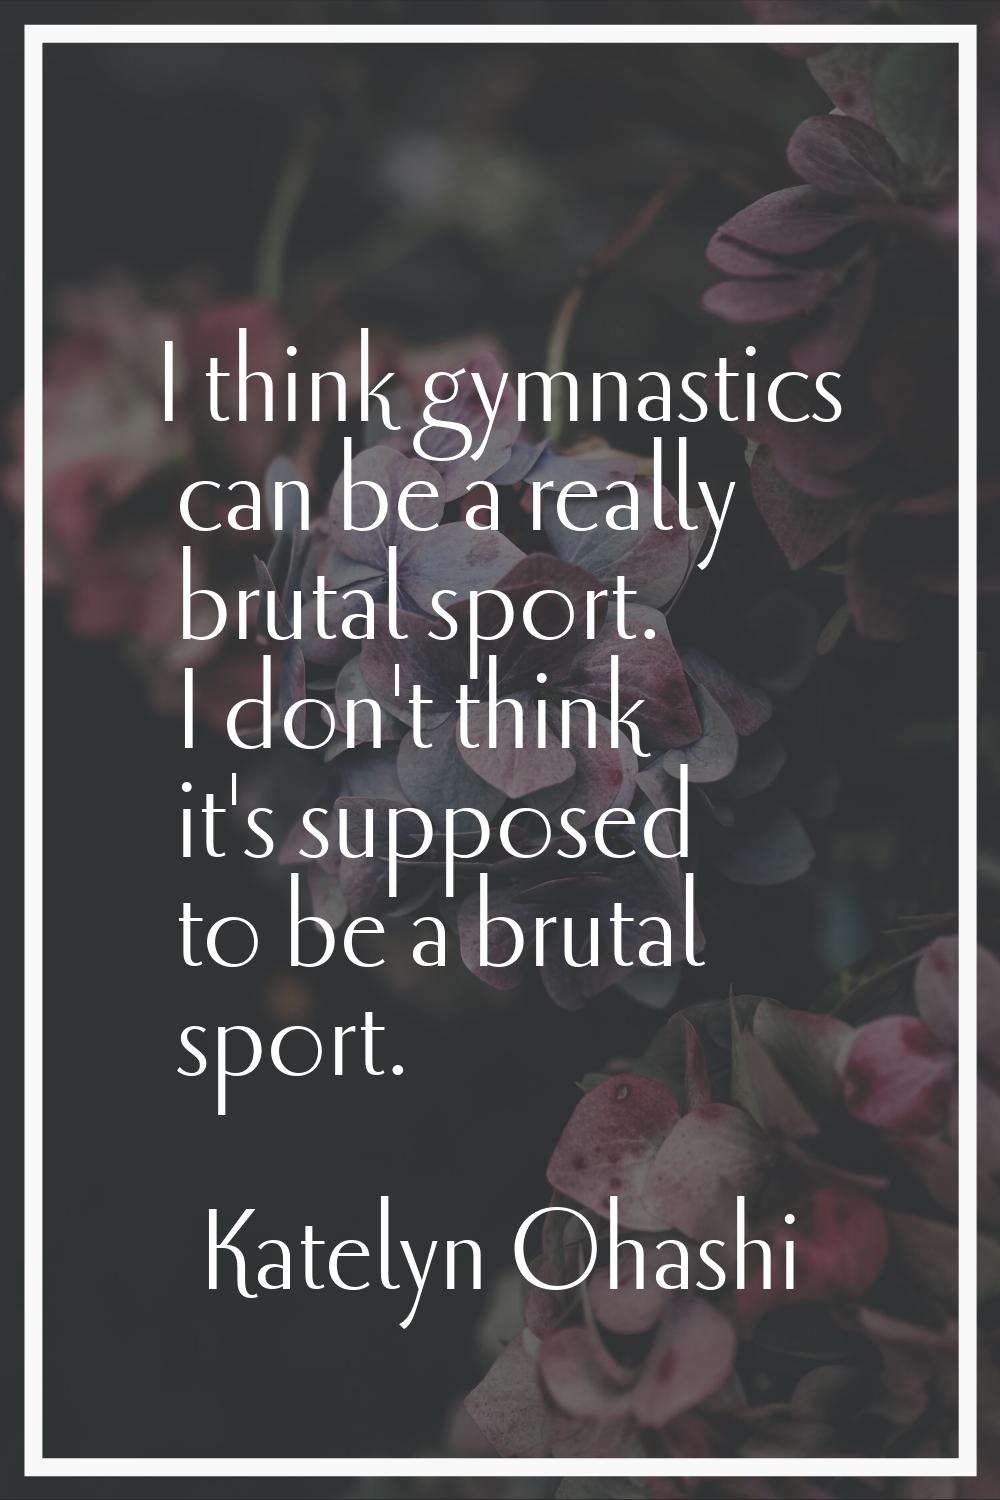 I think gymnastics can be a really brutal sport. I don't think it's supposed to be a brutal sport.